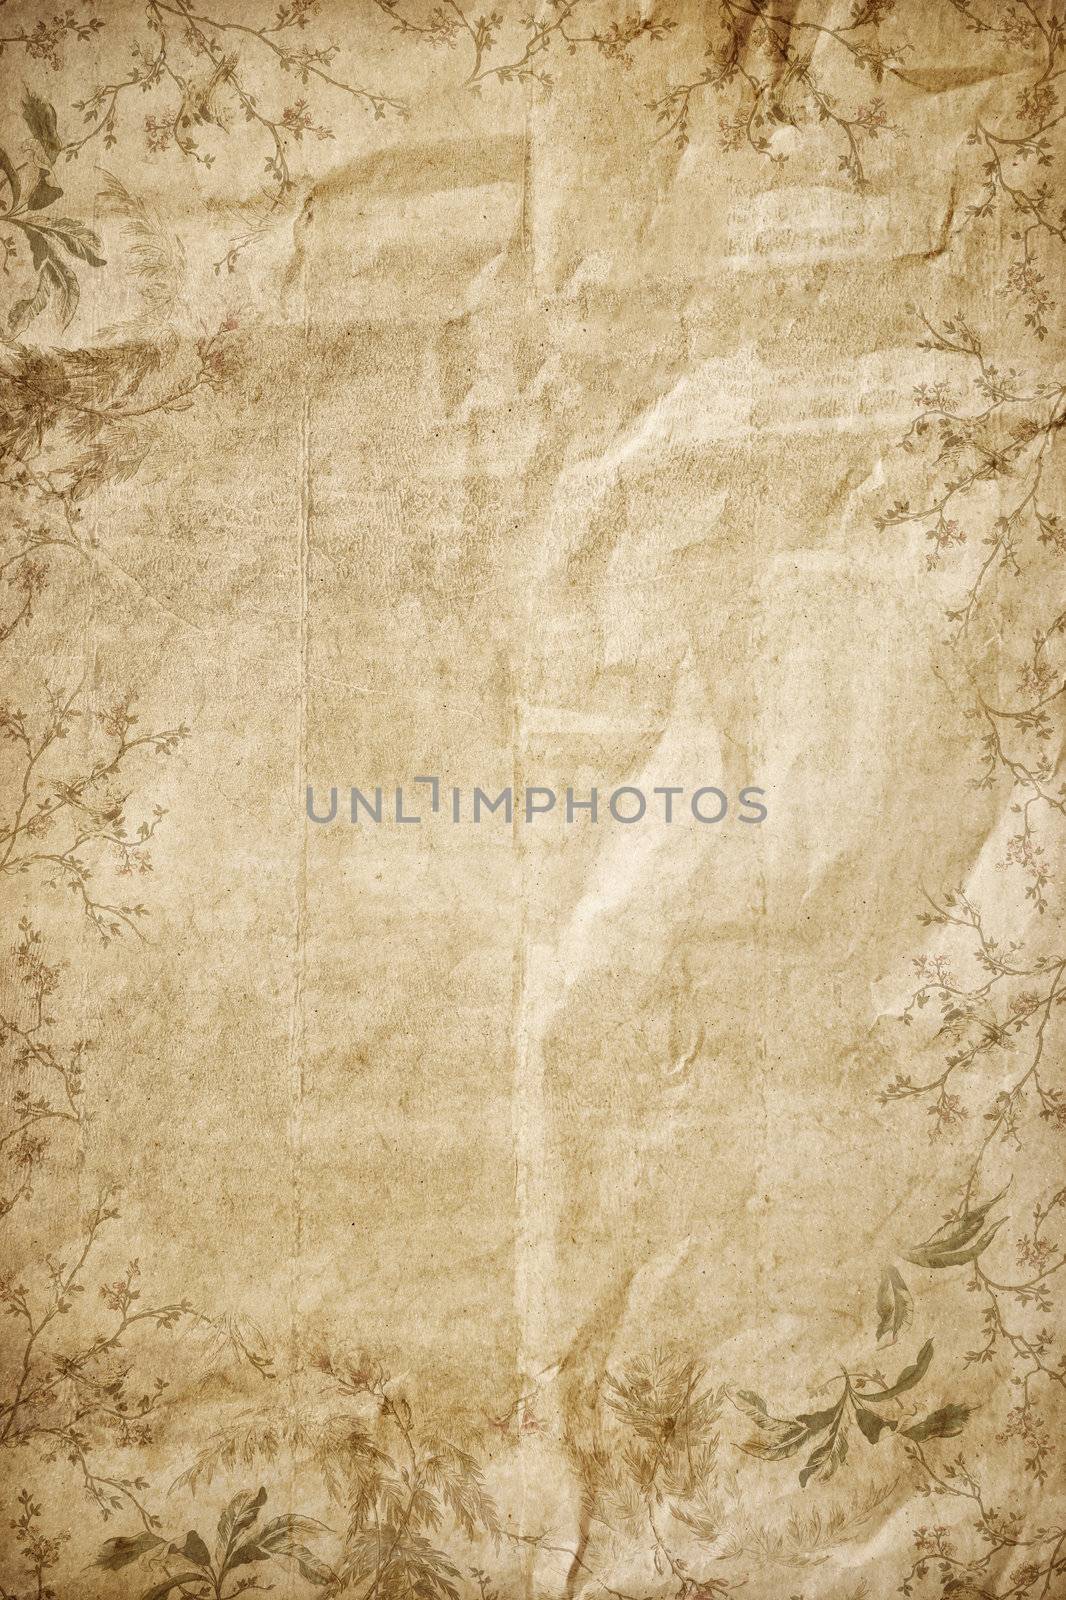 An image of an old paper texture background